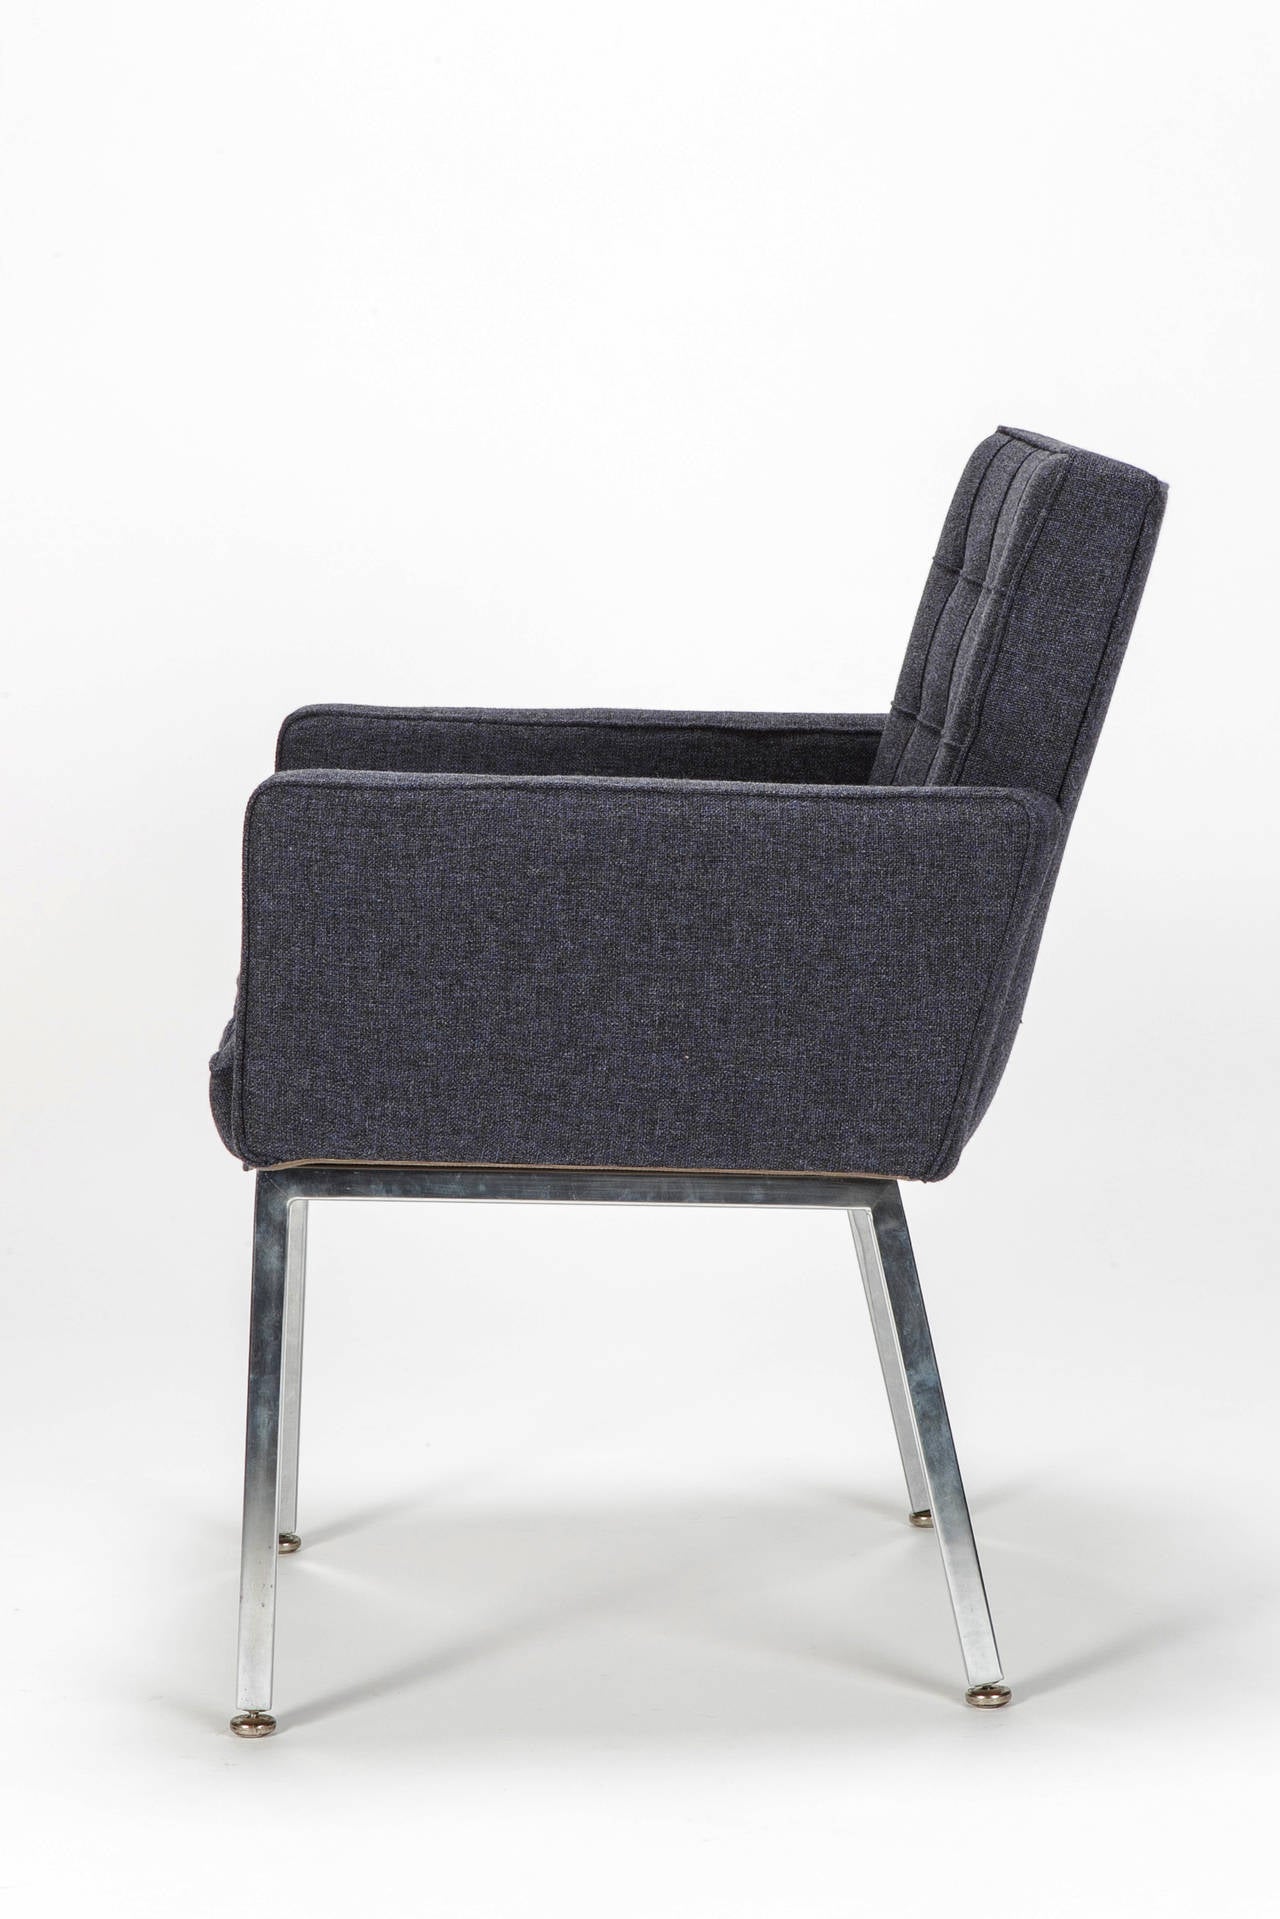 Swiss Rare Armchair by Vincent Cafiero for Knoll International, 1960s